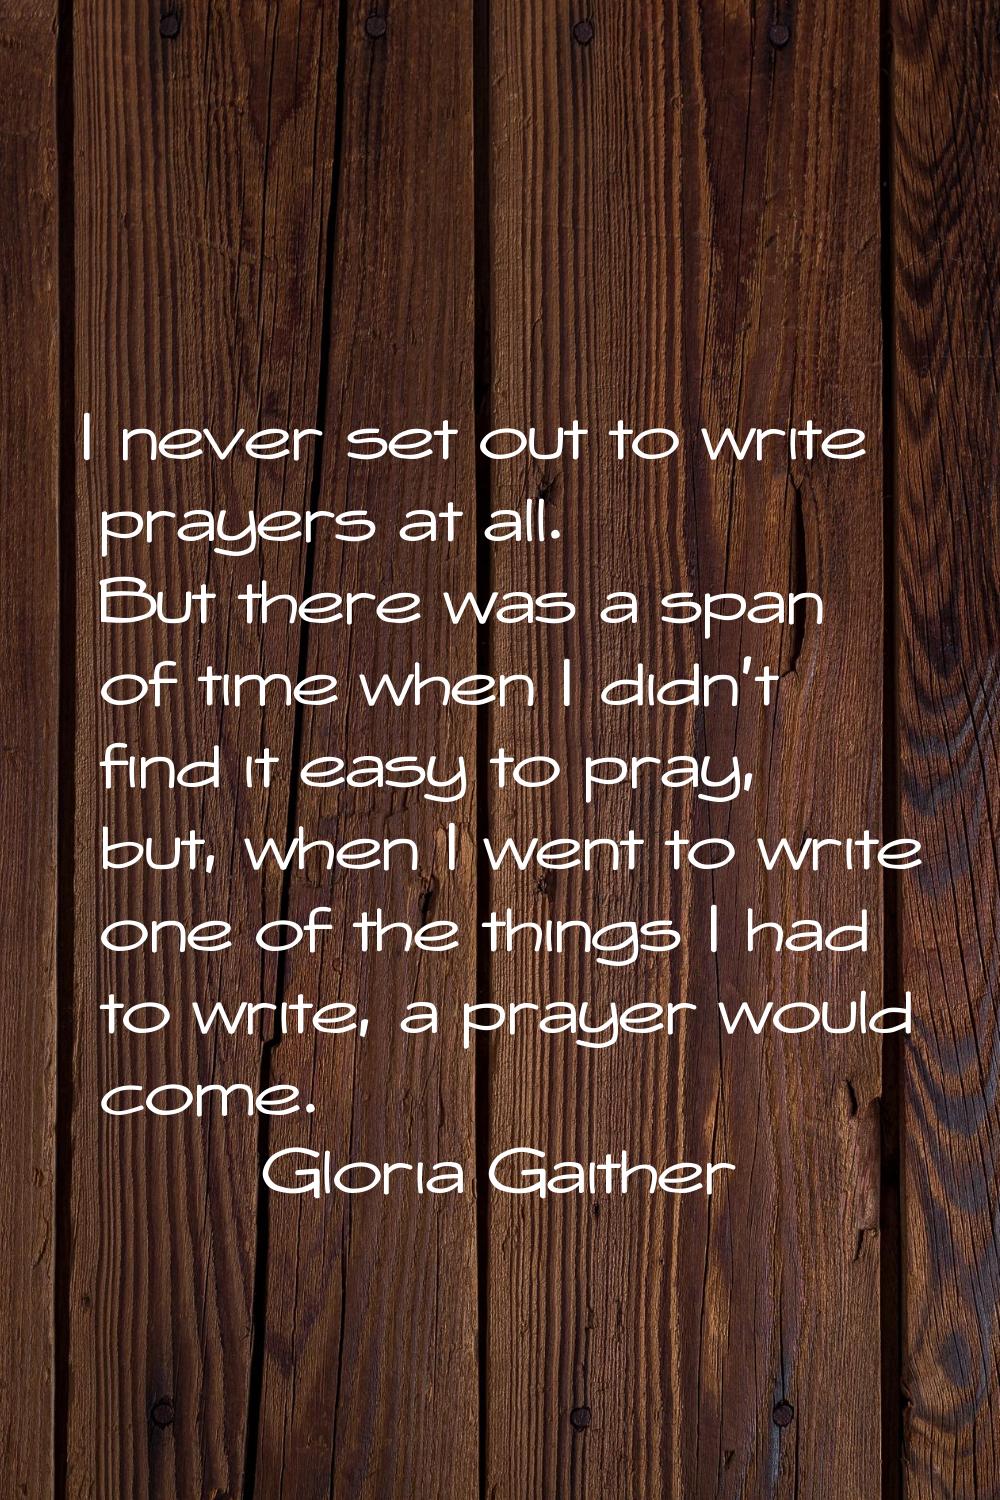 I never set out to write prayers at all. But there was a span of time when I didn't find it easy to